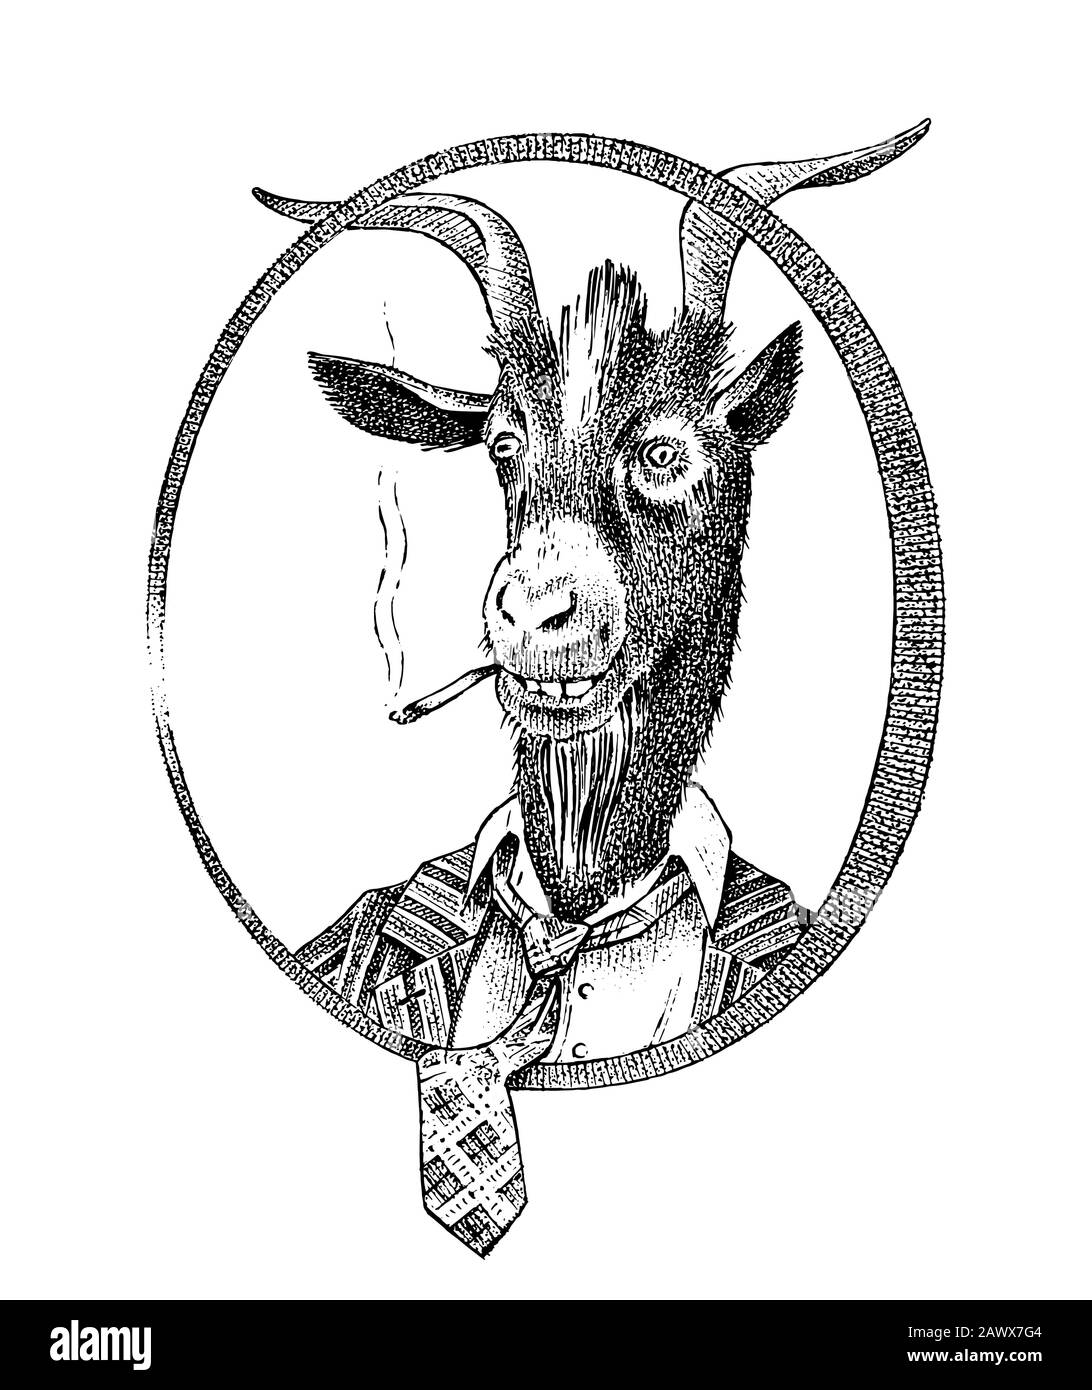 Smoking goat student or sheep. Hand drawn Animal person portrait. Engraved monochrome fashion sketch for card, label or tattoo. Hipster Stock Vector